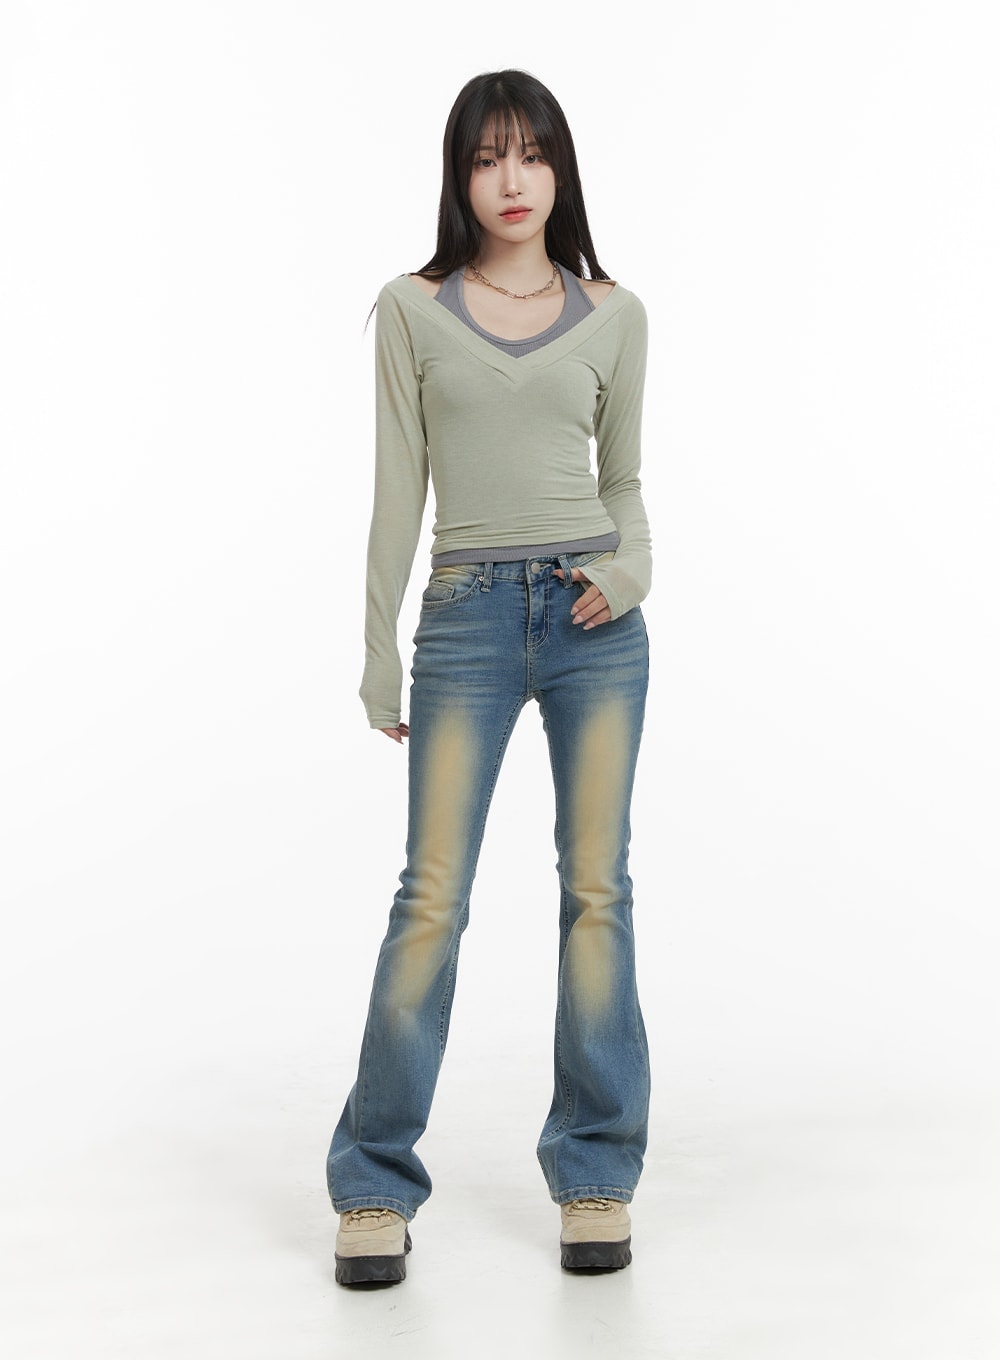 slim-fit-washed-bootcut-jeans-ca402